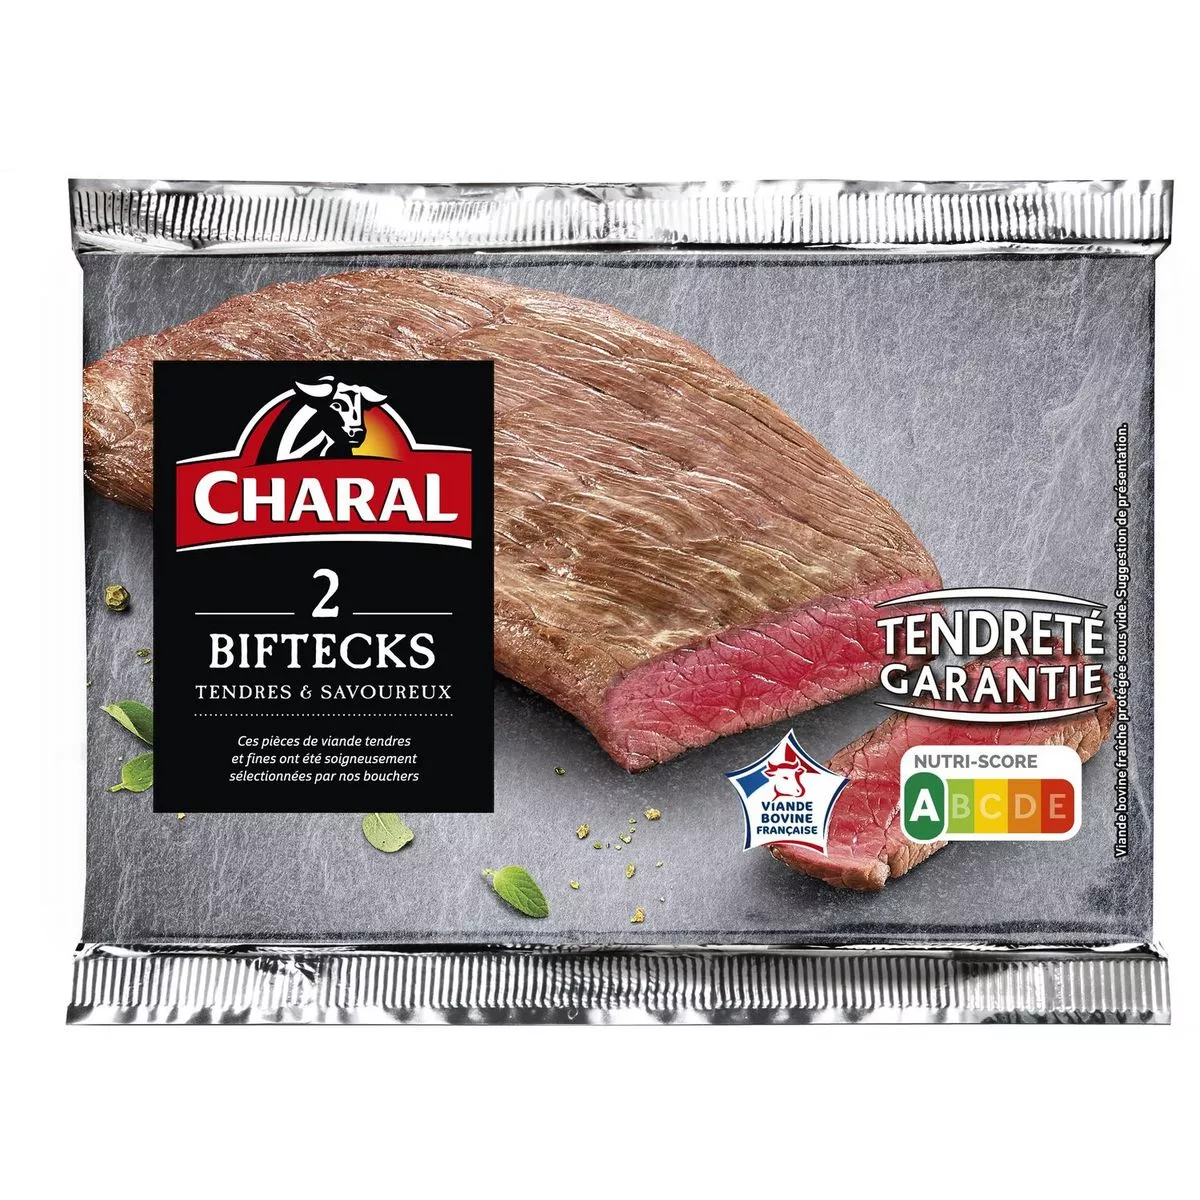 Charal Biftecks extra tendre 2 pieces 260g